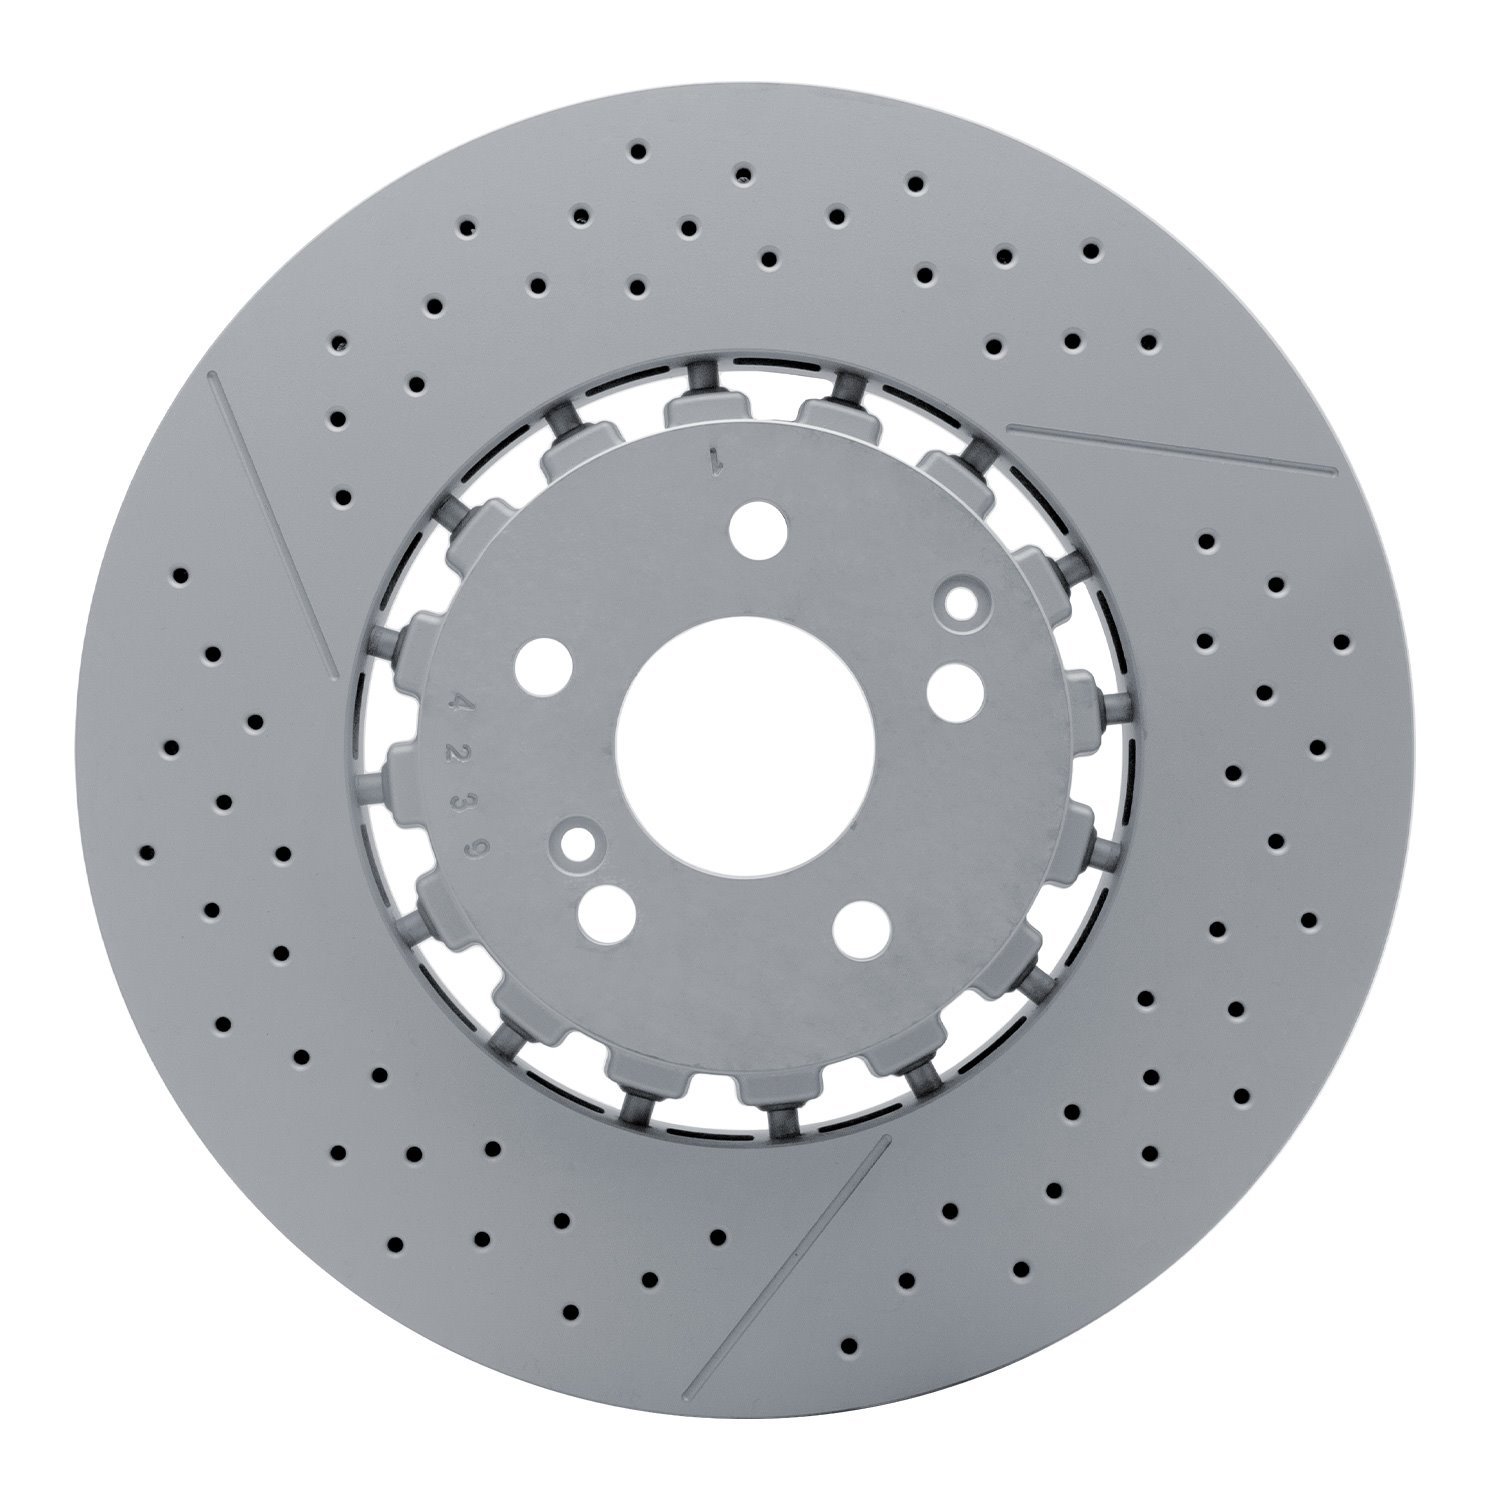 Hi-Carbon Alloy Geomet-Coated Drilled & Slotted Rotor, Fits